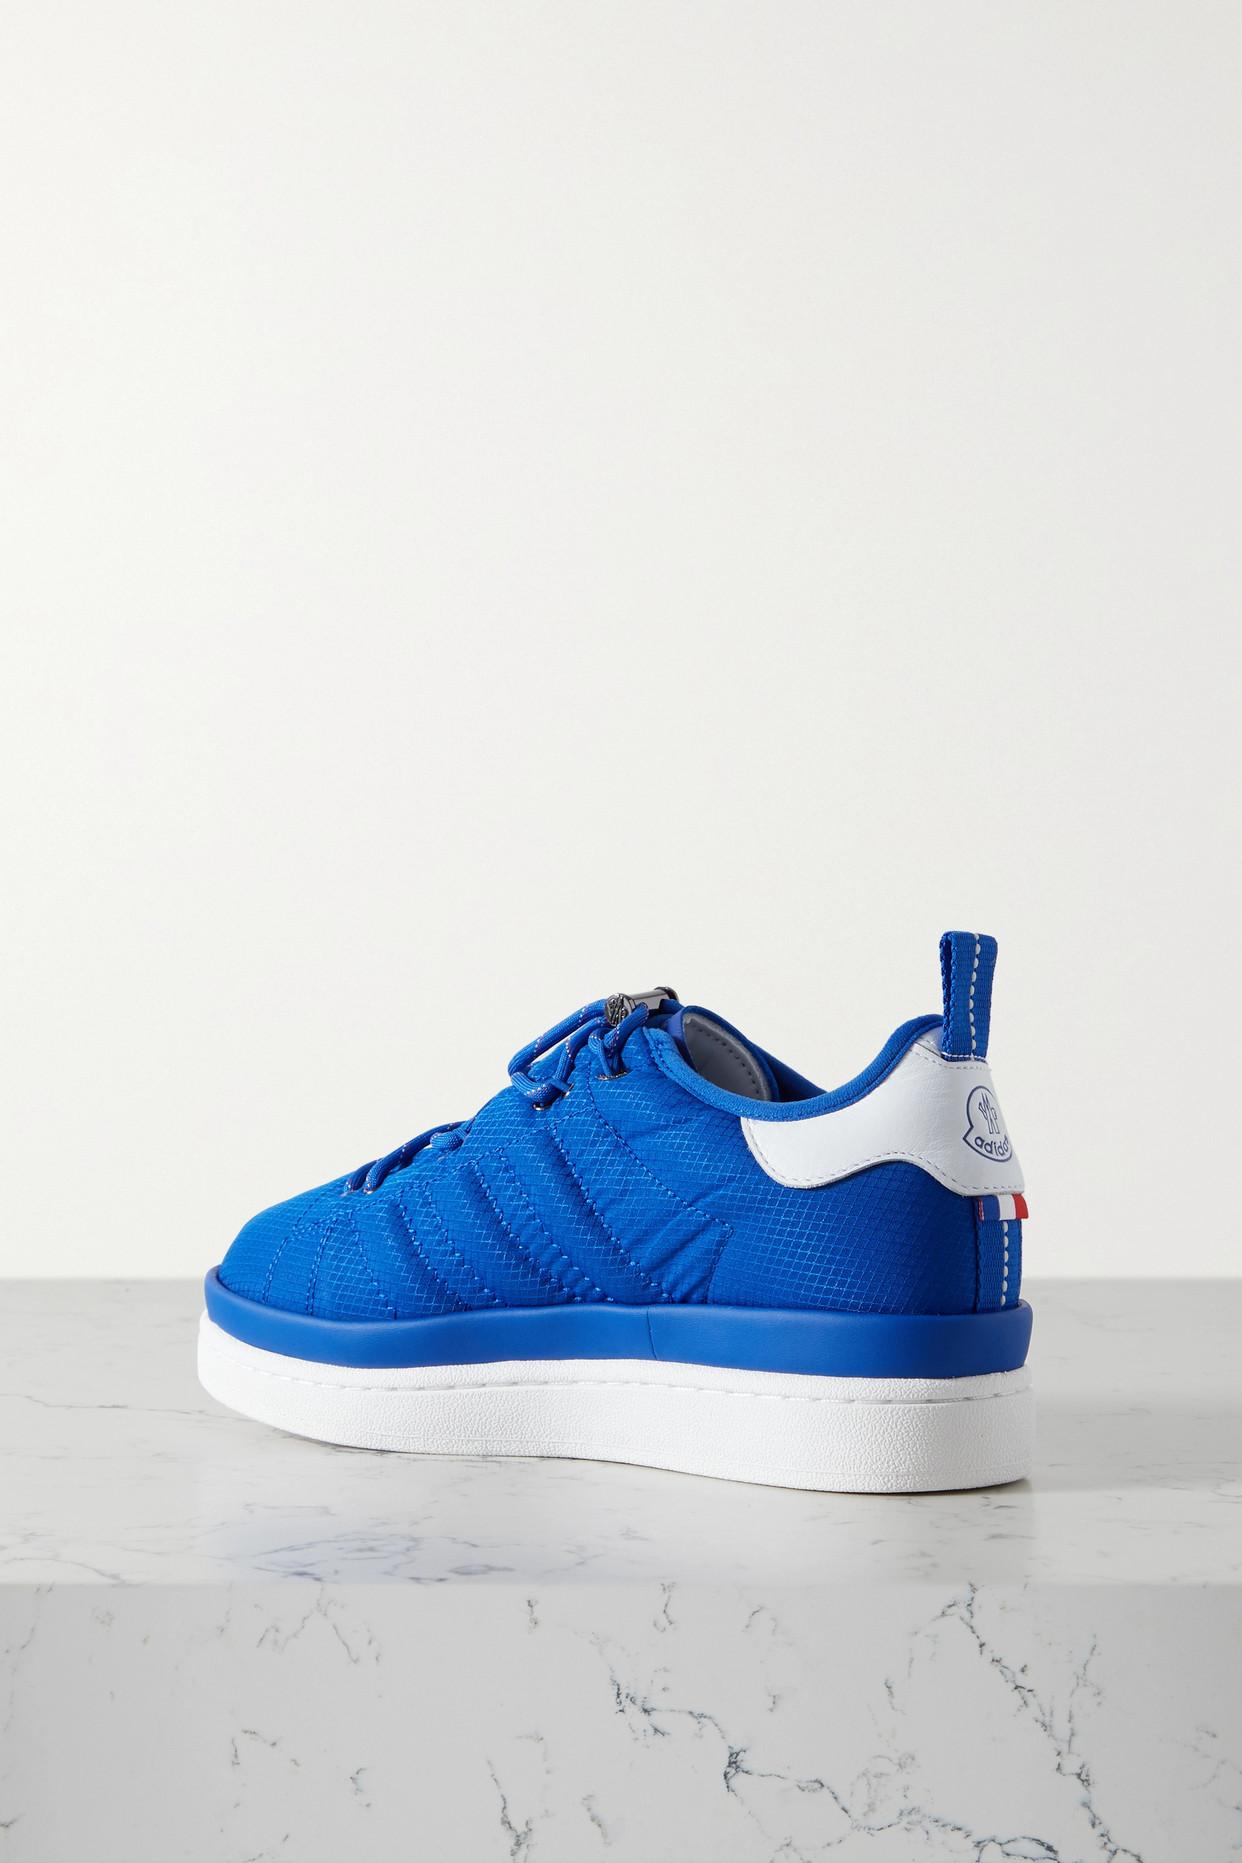 Moncler Genius + Adidas Originals Campus Leather-trimmed Ripstop Sneakers  in Blue | Lyst